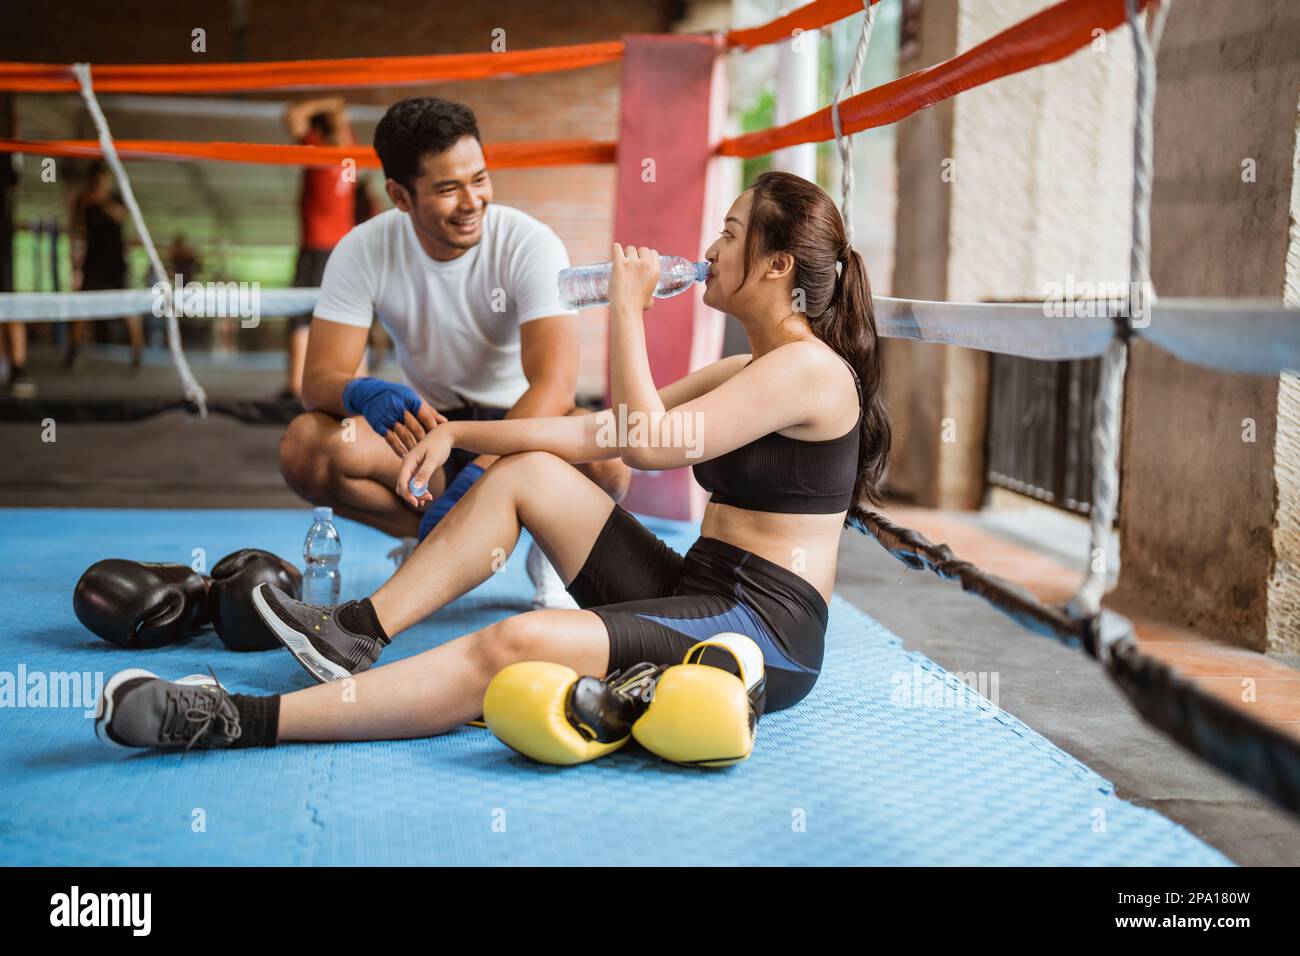 the male boxer talking to the female boxer Stock Photo